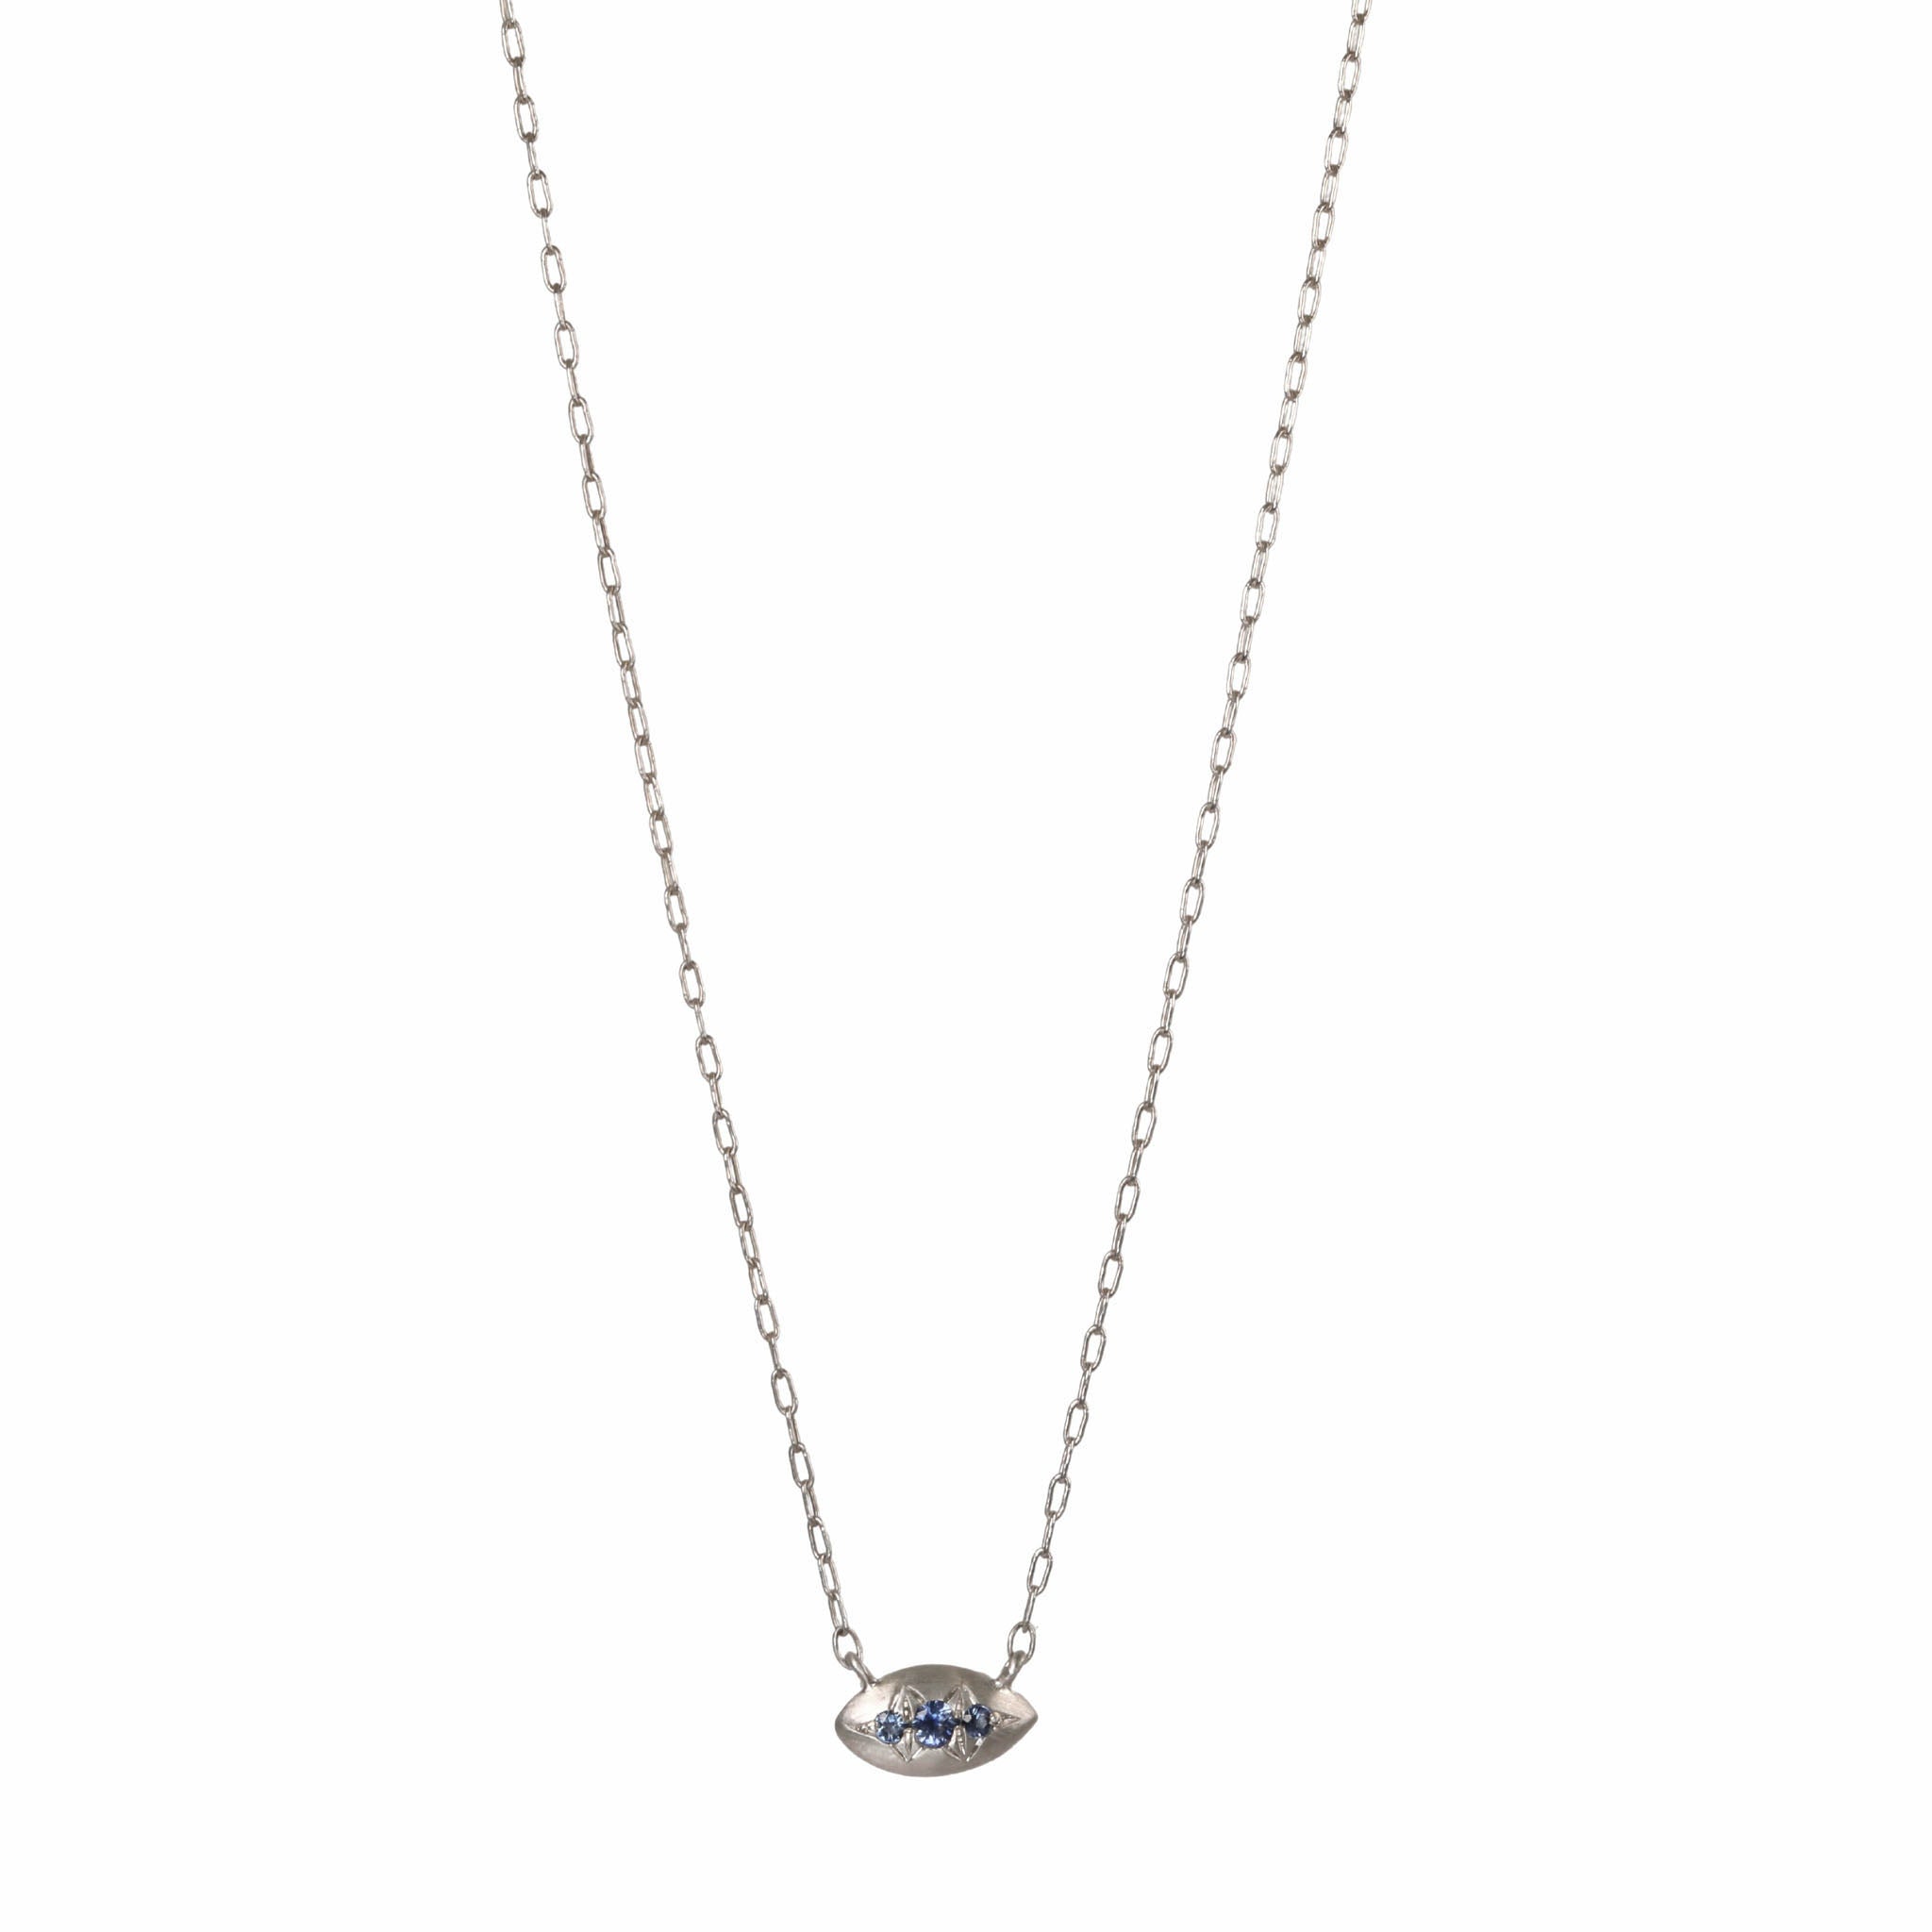 Sterling Silver Elongated Oval Disc Necklace With Three Star-Set Blue Sapphires